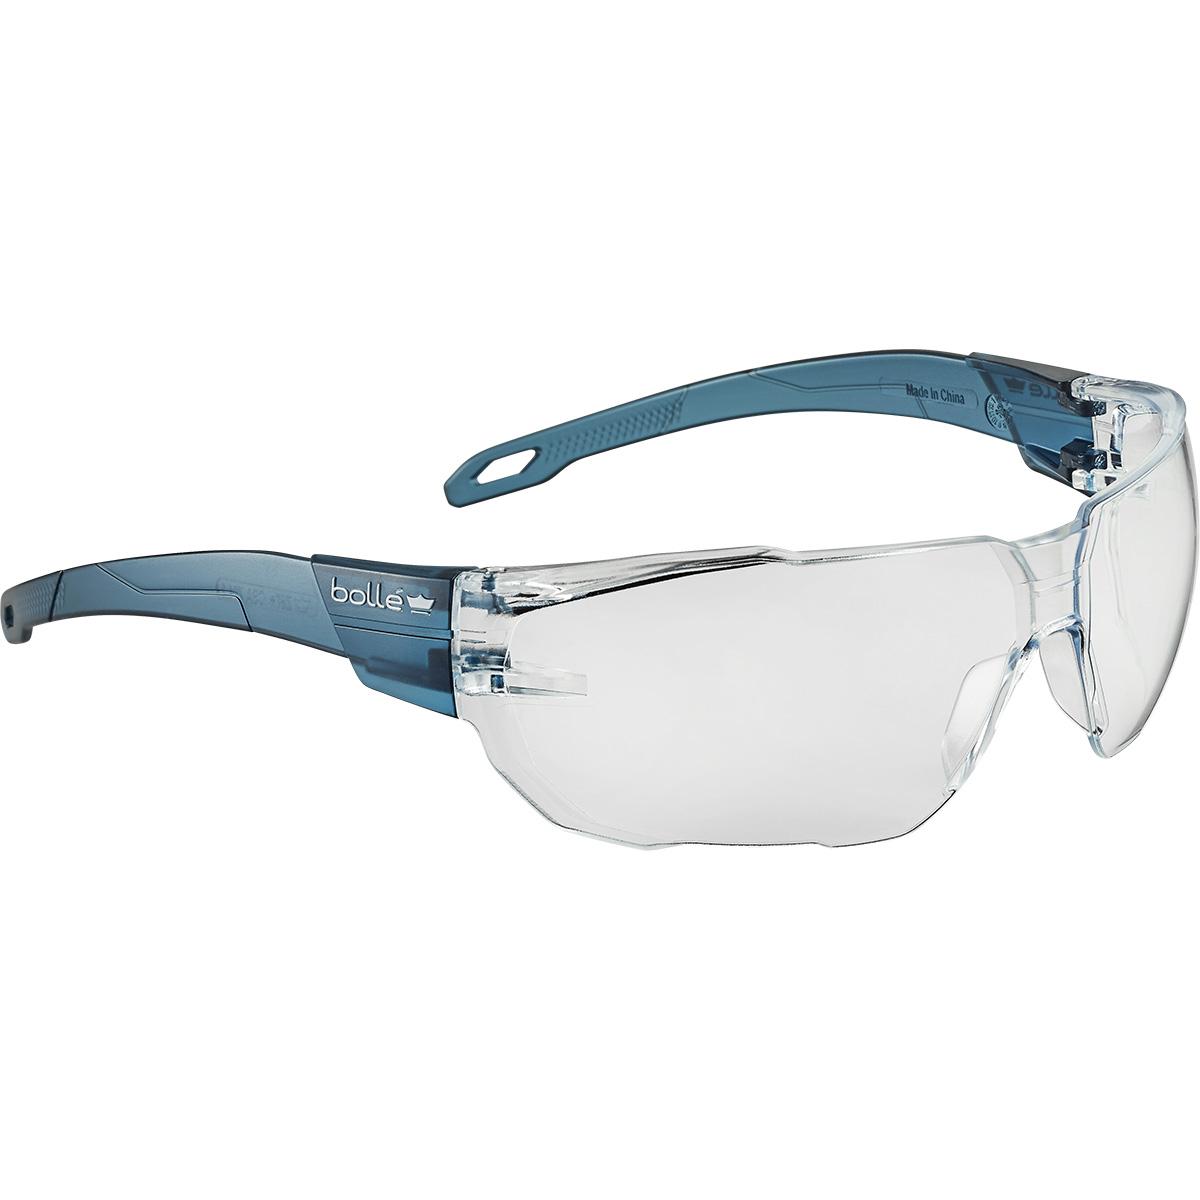 bolle protective work glasses